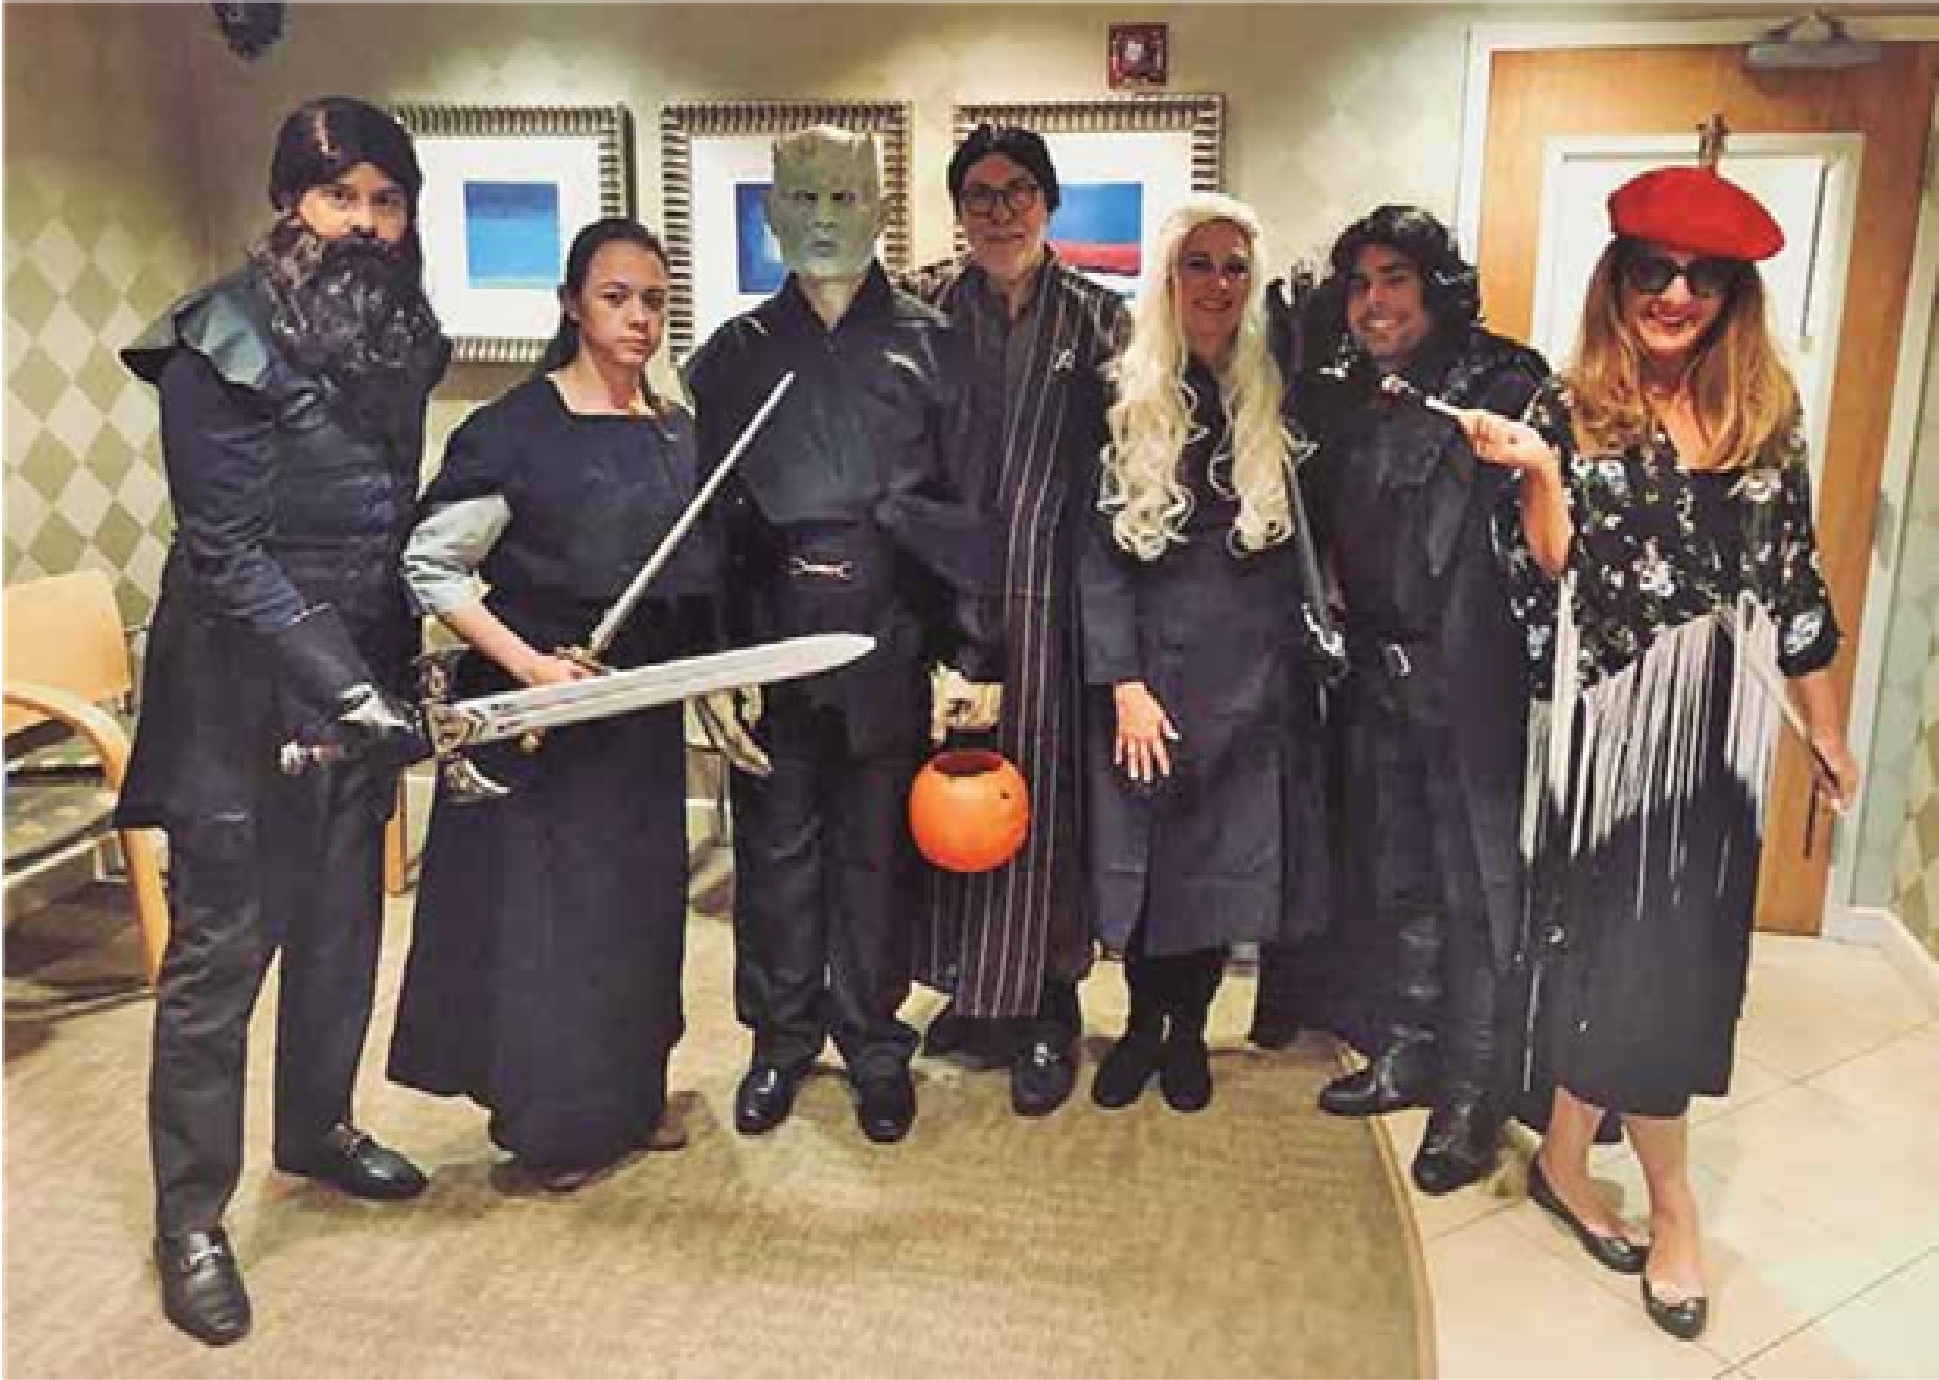 Coral Gables Hospital Celebrates Halloween Game of Thrones Style